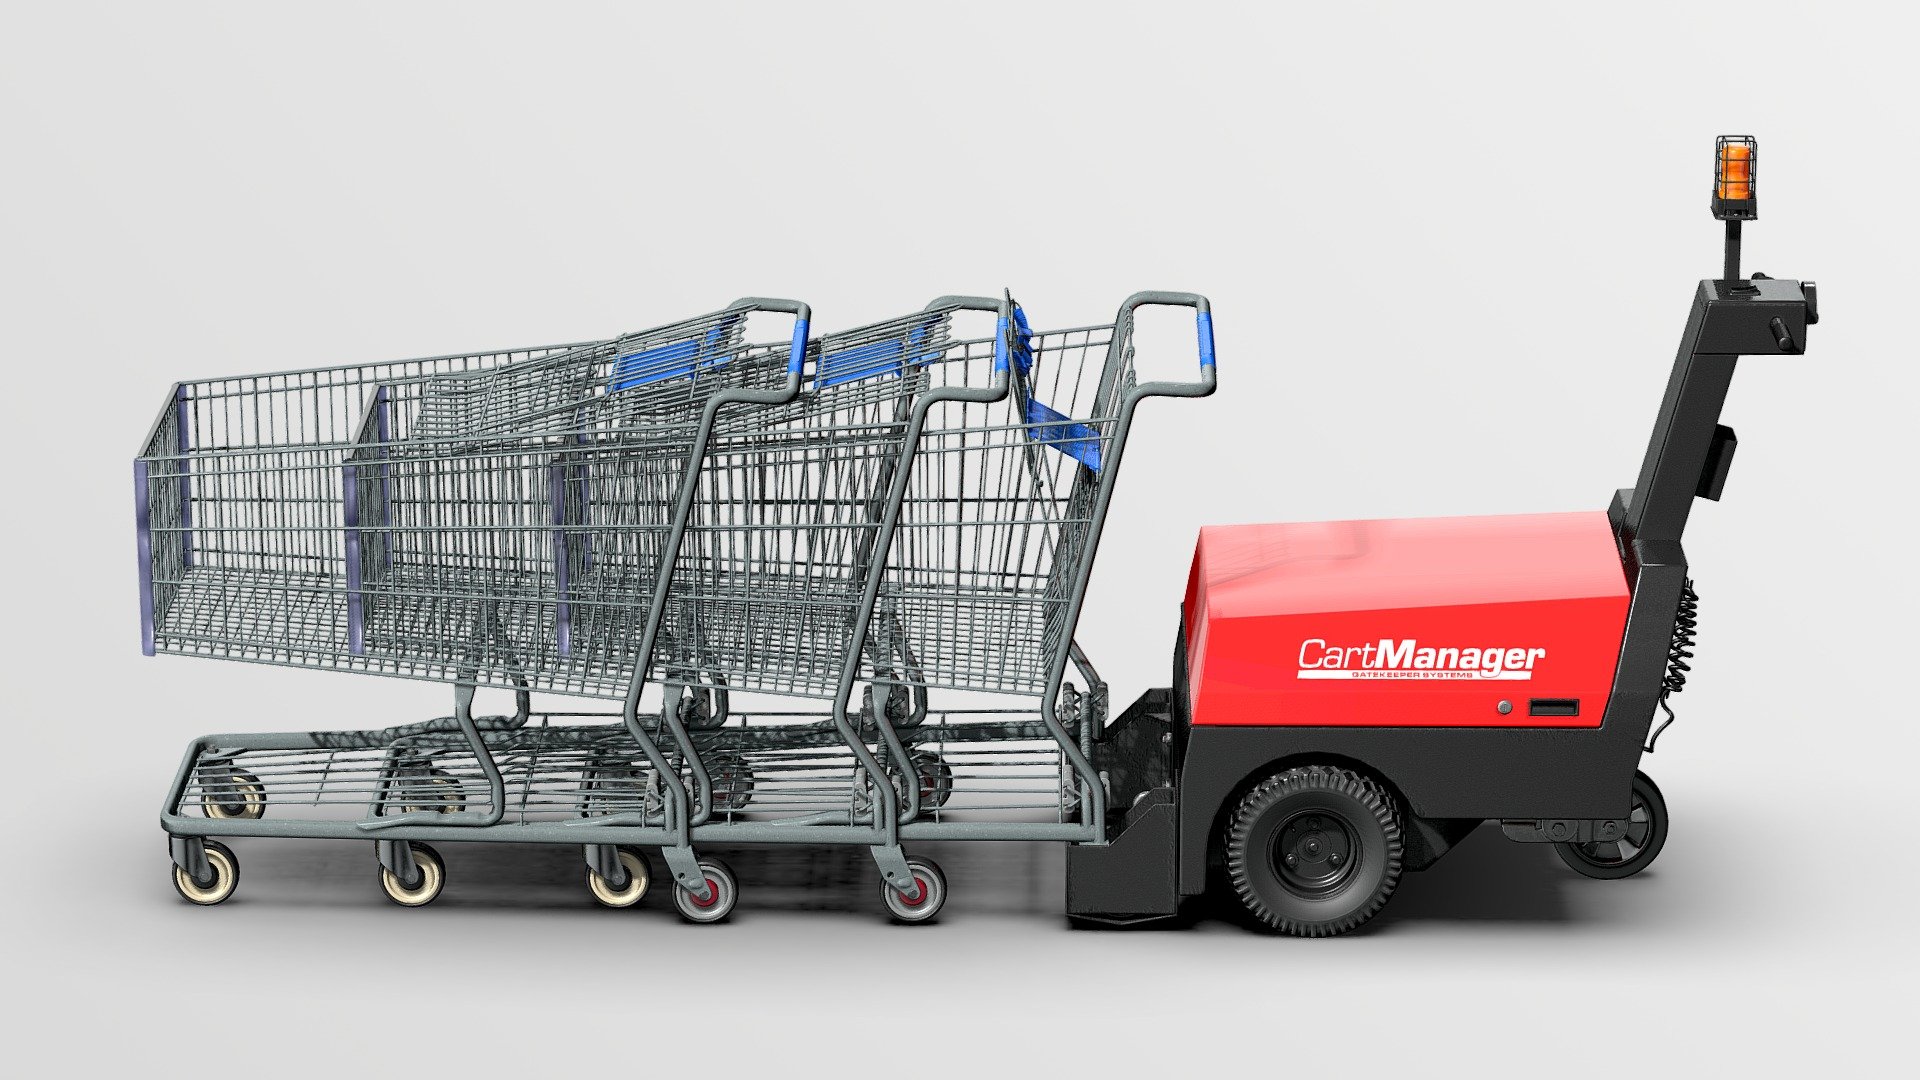 Shopping Carts and Cart Carrier Manager Walmart Edition 2022 3d PBR.
Dimensions: Height : 44.5 in. (113.10 mm) Width: 28.25 in. (71.80 mm) Depth: 45.00 in. (114.30 mm) - Shopping Cart Carrier Manager Collection 2022 3d - Buy Royalty Free 3D model by specifickarma 3d model